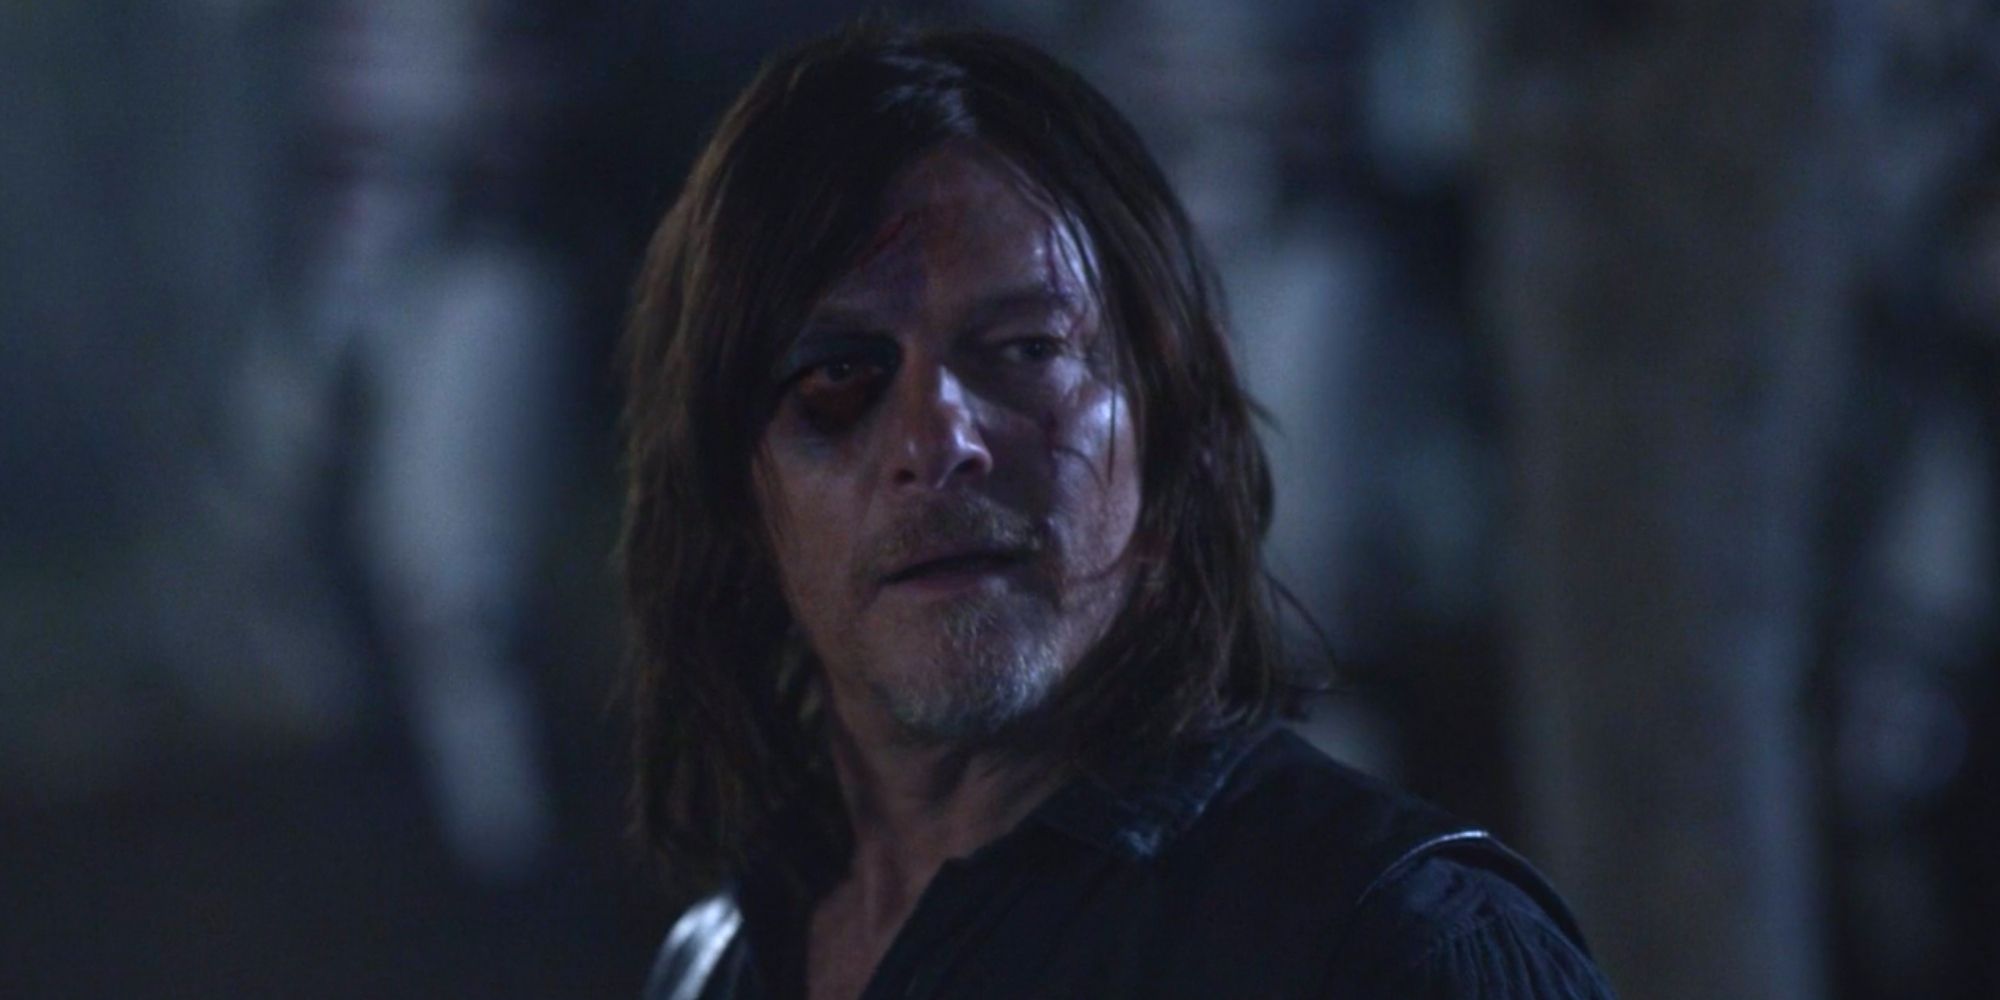 Norman Reedus as Daryl Dixon with black eye in The Walking Dead finale